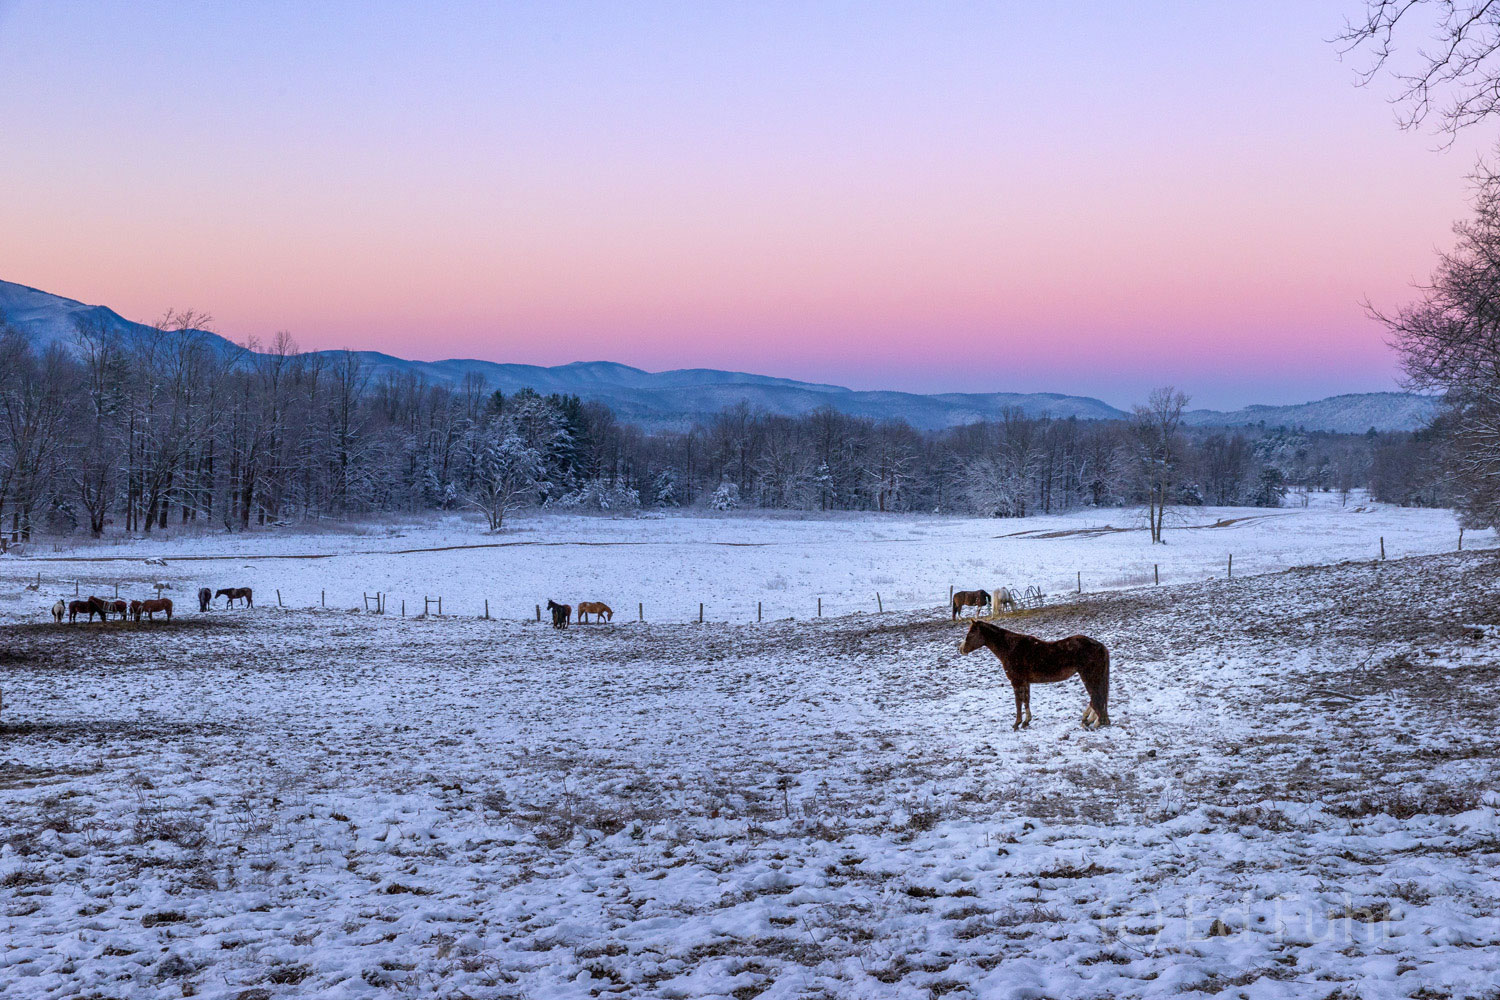 A small herd of horses stand in the predawn cold at the entrance to Cades Cove.